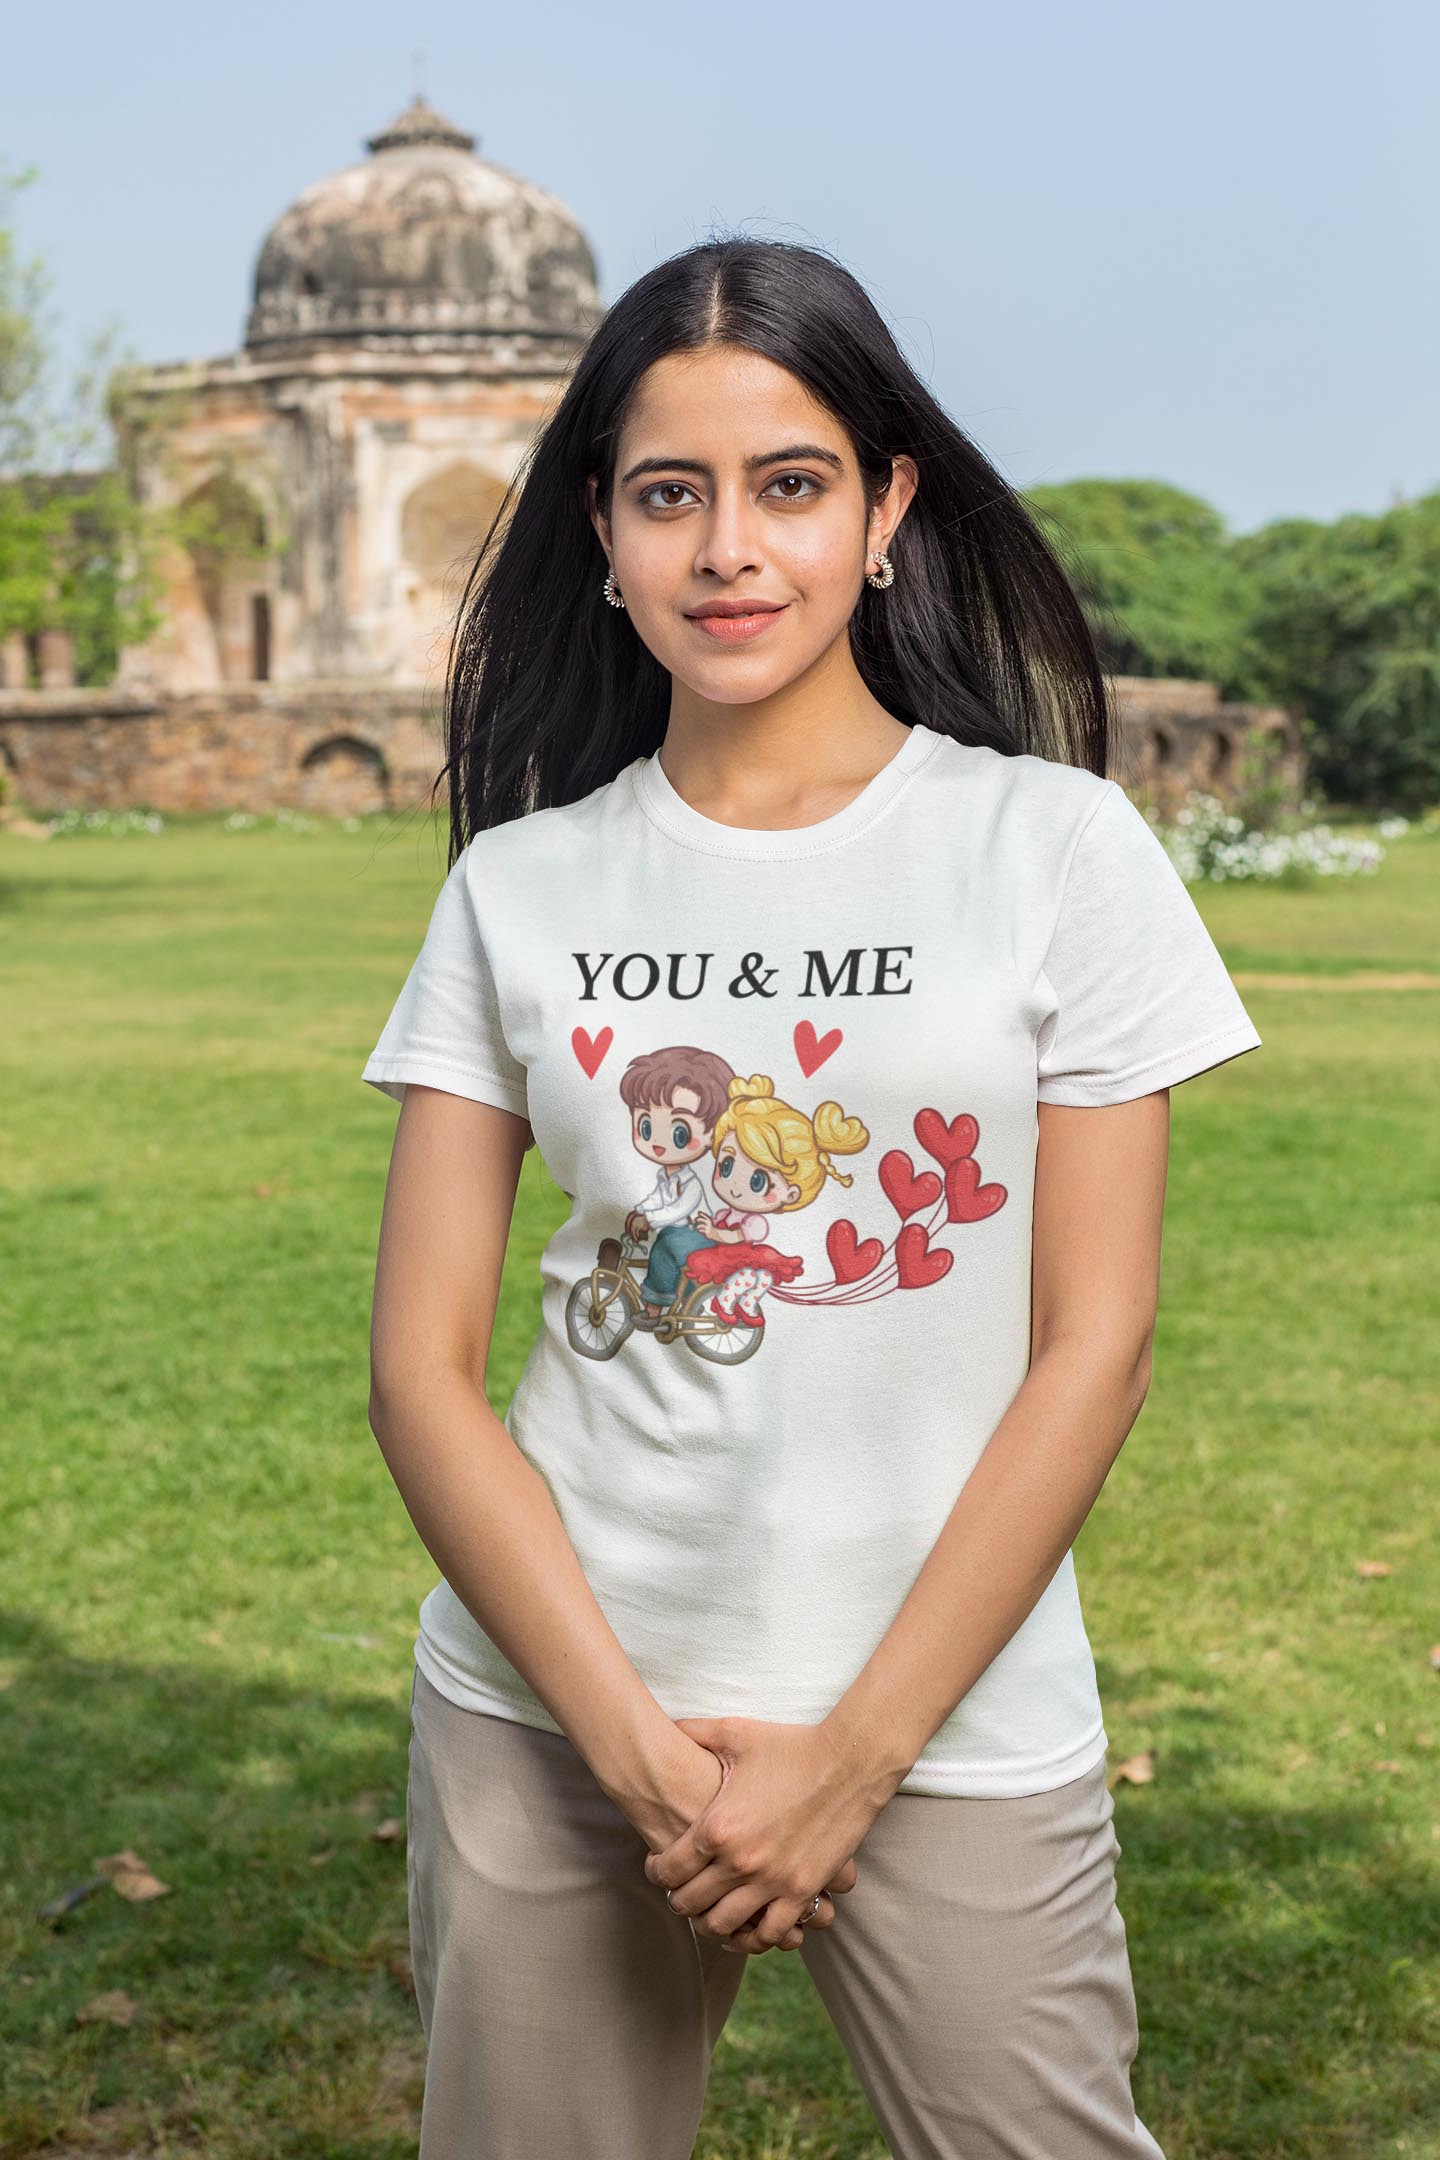 You And Me Women's Cotton T-Shirt